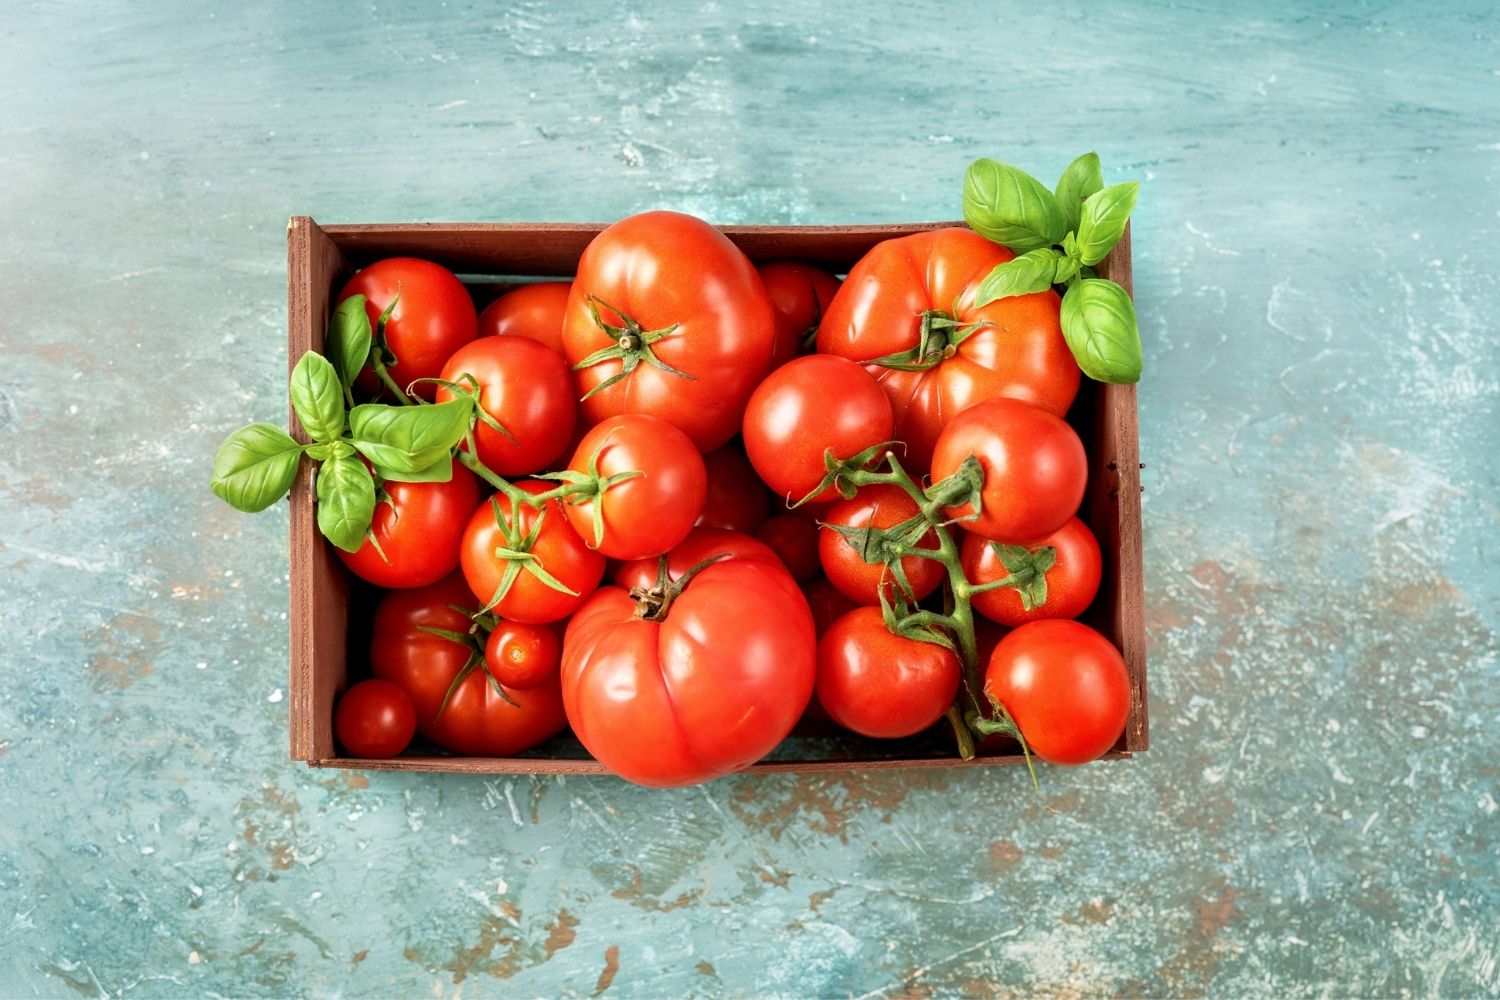 How To Store Tomatoes For Long Time Without Fridge